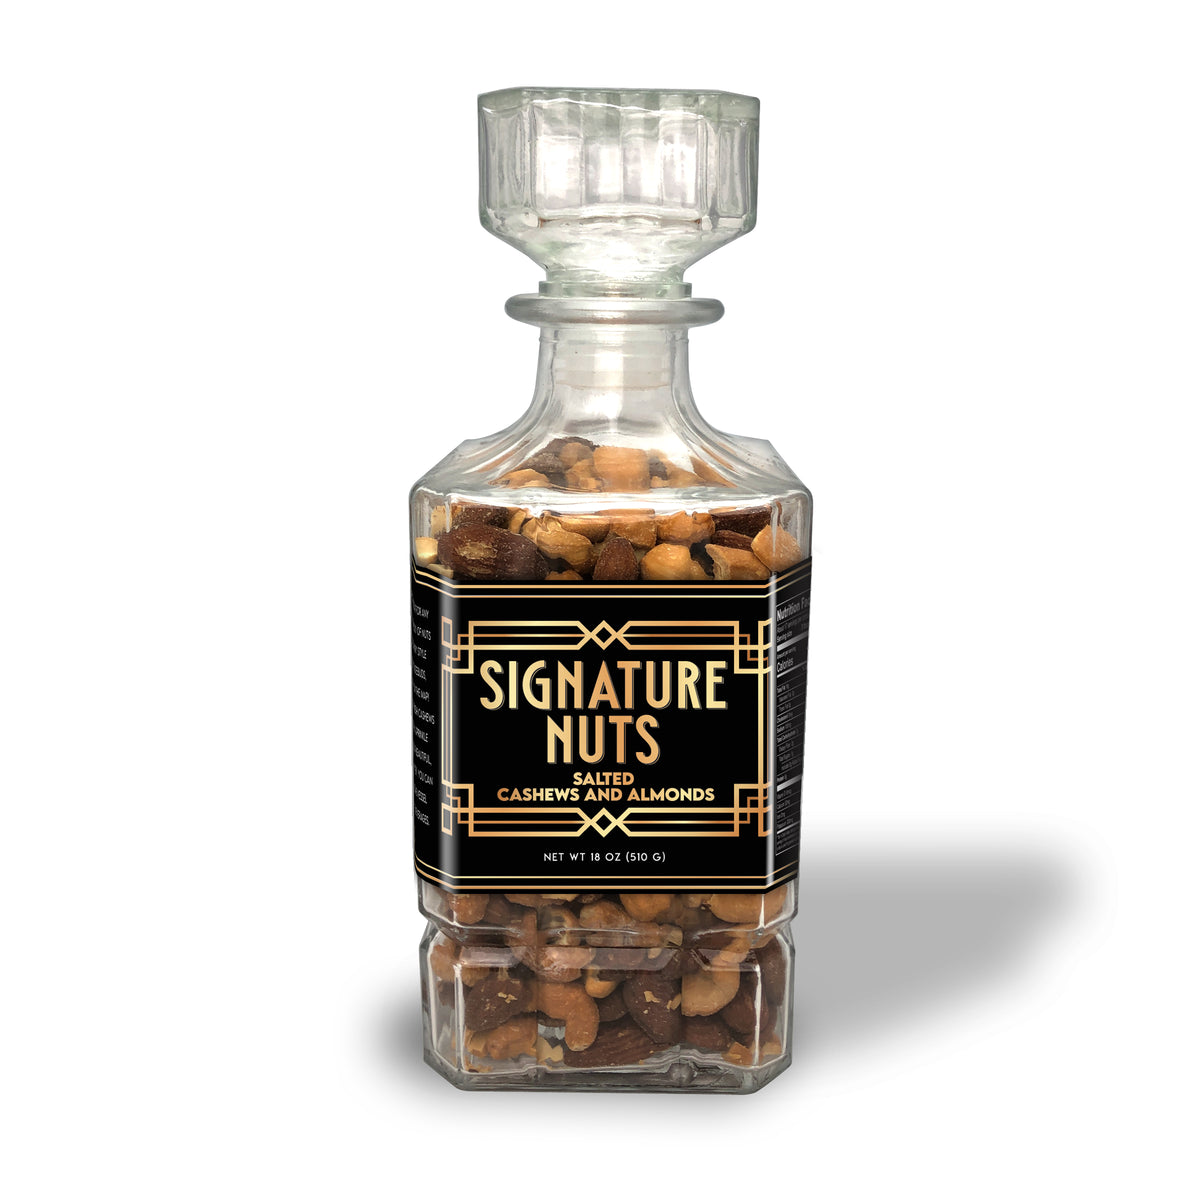 18oz of Signature Salted Cashew and Almonds in Glass Decanter.